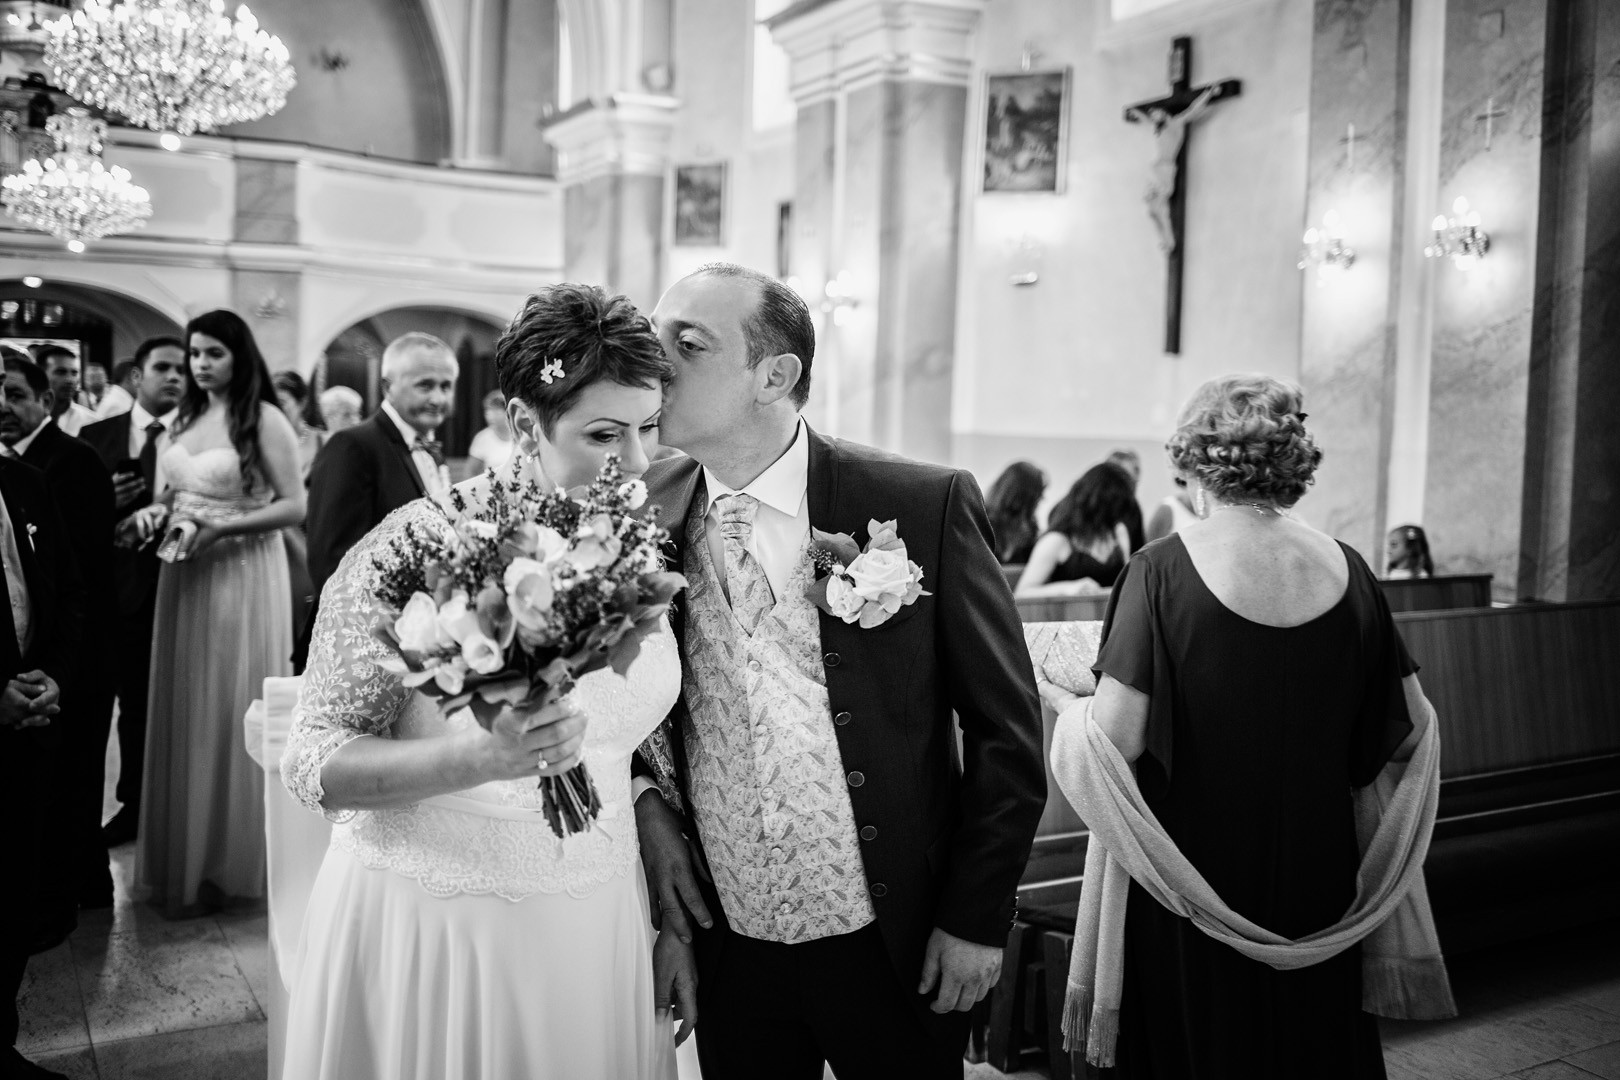 Wedding photos from the Slovak-Italian wedding of Mirka and Baldy in the beautiful surroundings of the Gbeľany Manor House - 0024.jpg